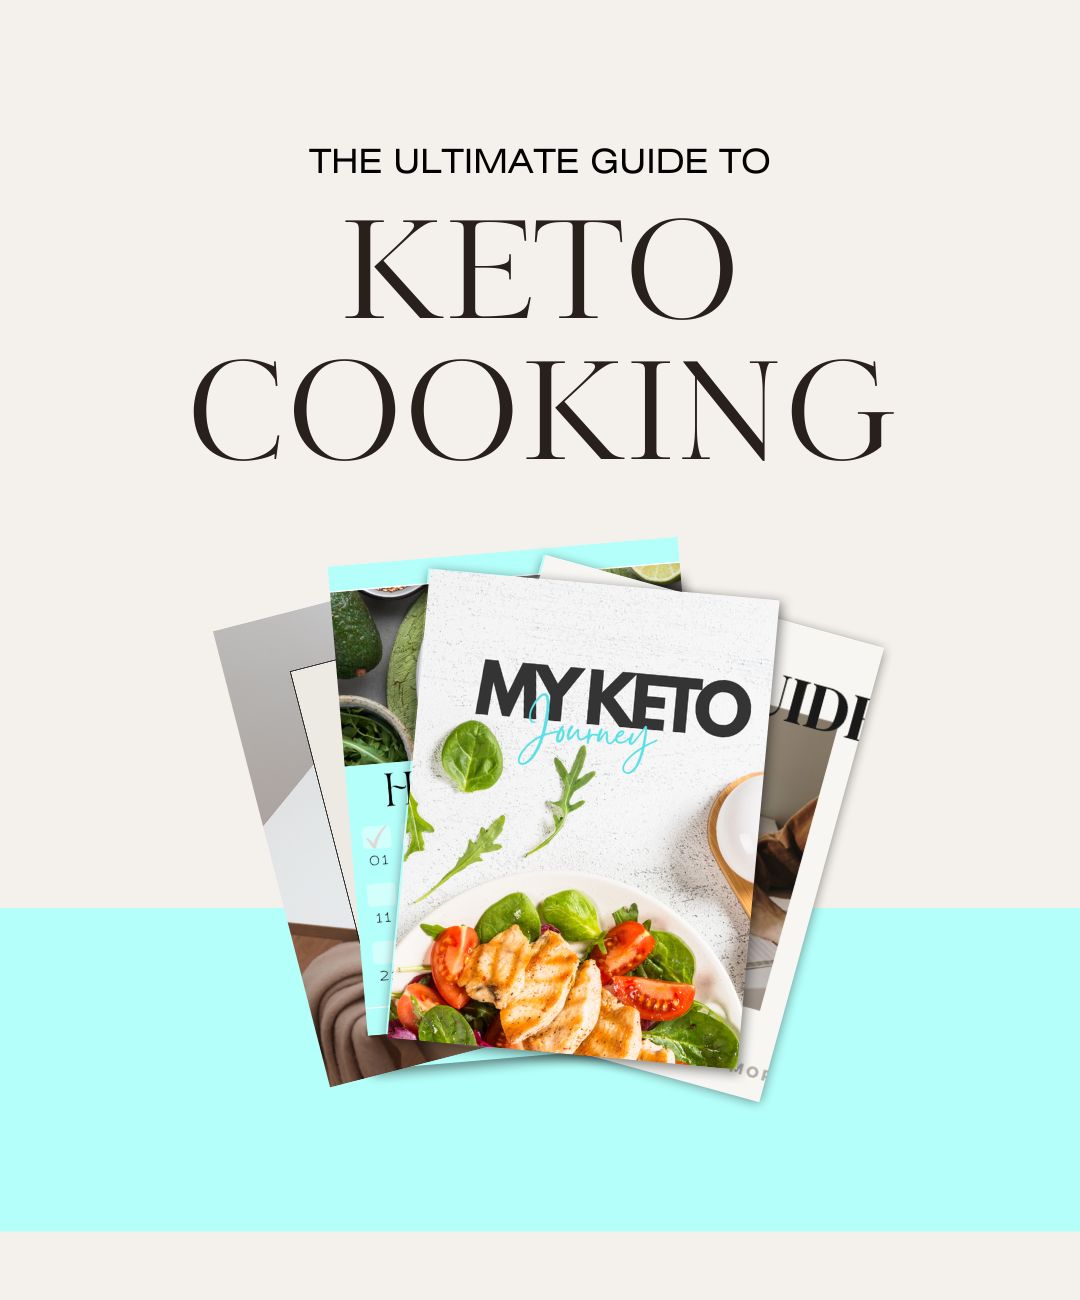 The Ultimate Guide to Keto Cooking